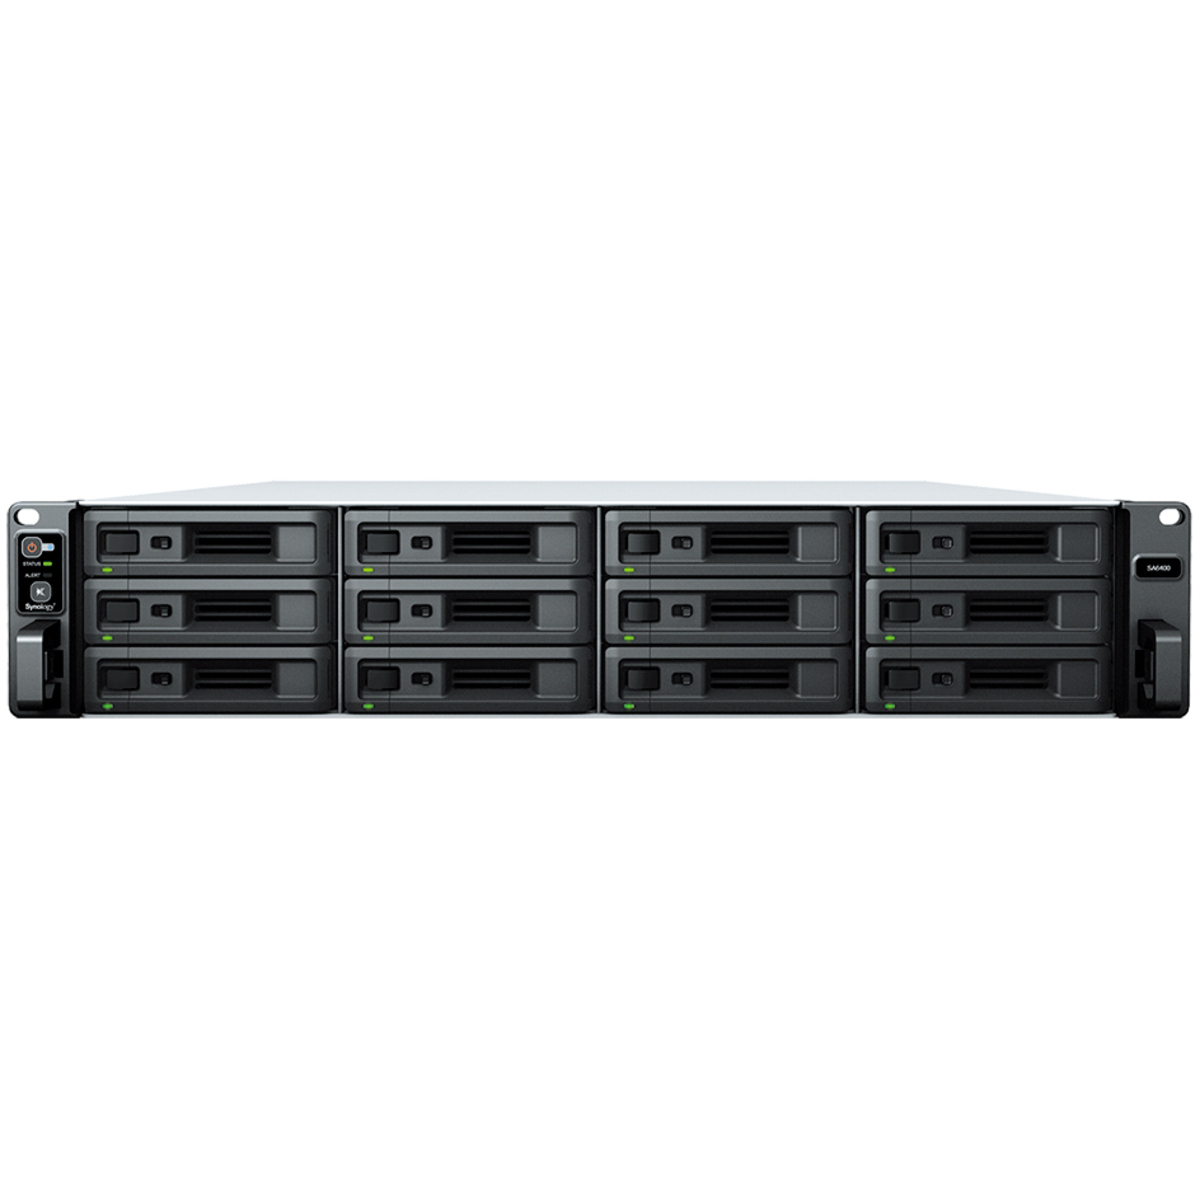 Synology RackStation SA6400 42tb 12-Bay RackMount Large Business / Enterprise NAS - Network Attached Storage Device 7x6tb Western Digital Red Pro WD6003FFBX 3.5 7200rpm SATA 6Gb/s HDD NAS Class Drives Installed - Burn-In Tested RackStation SA6400